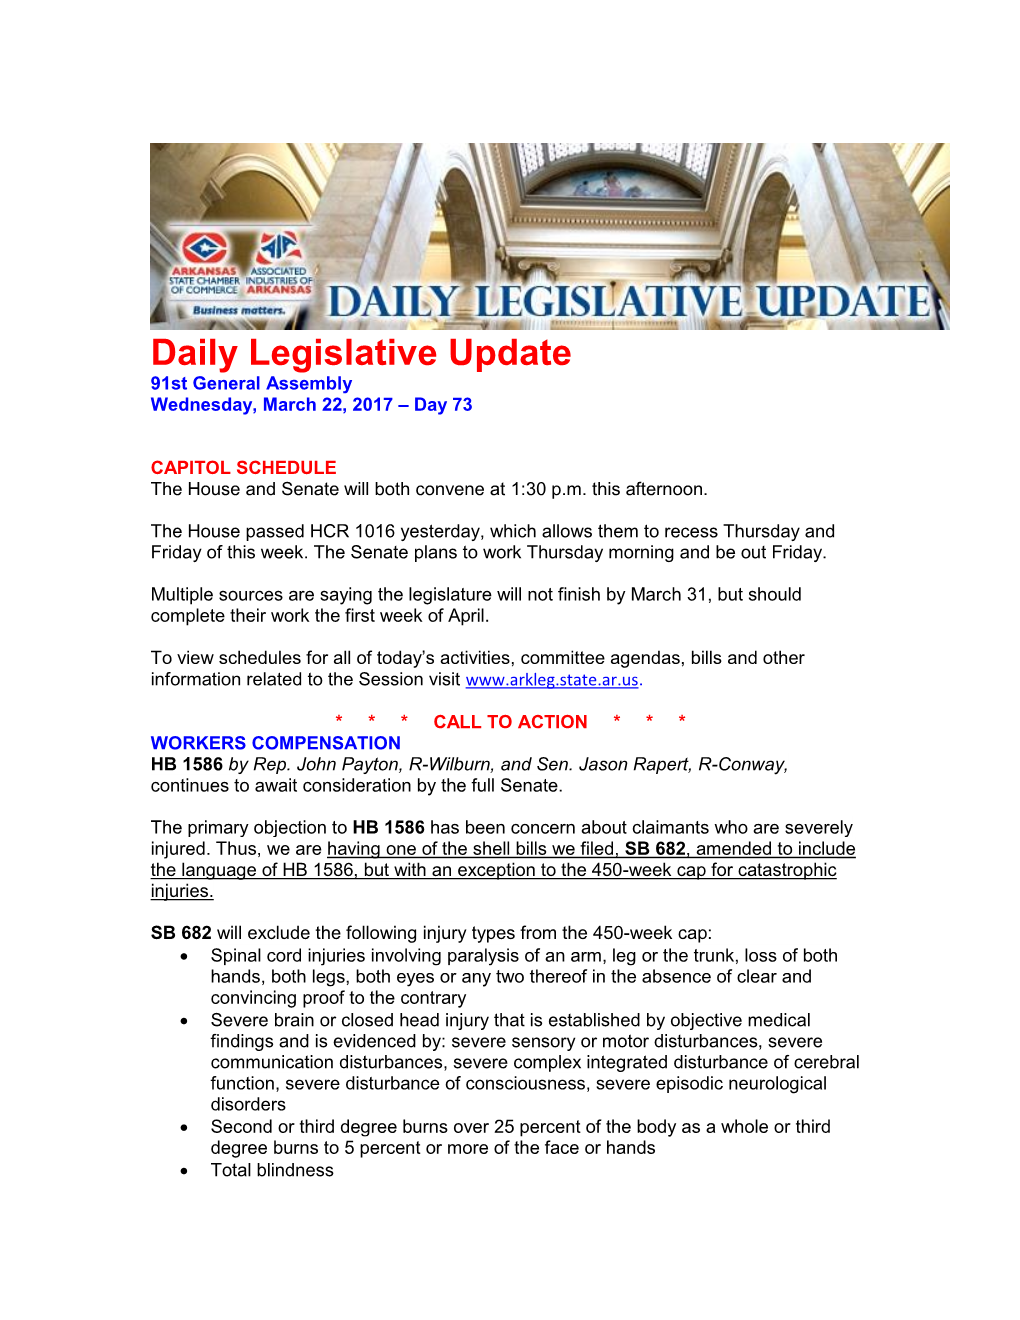 Daily Legislative Update 91St General Assembly Wednesday, March 22, 2017 – Day 73